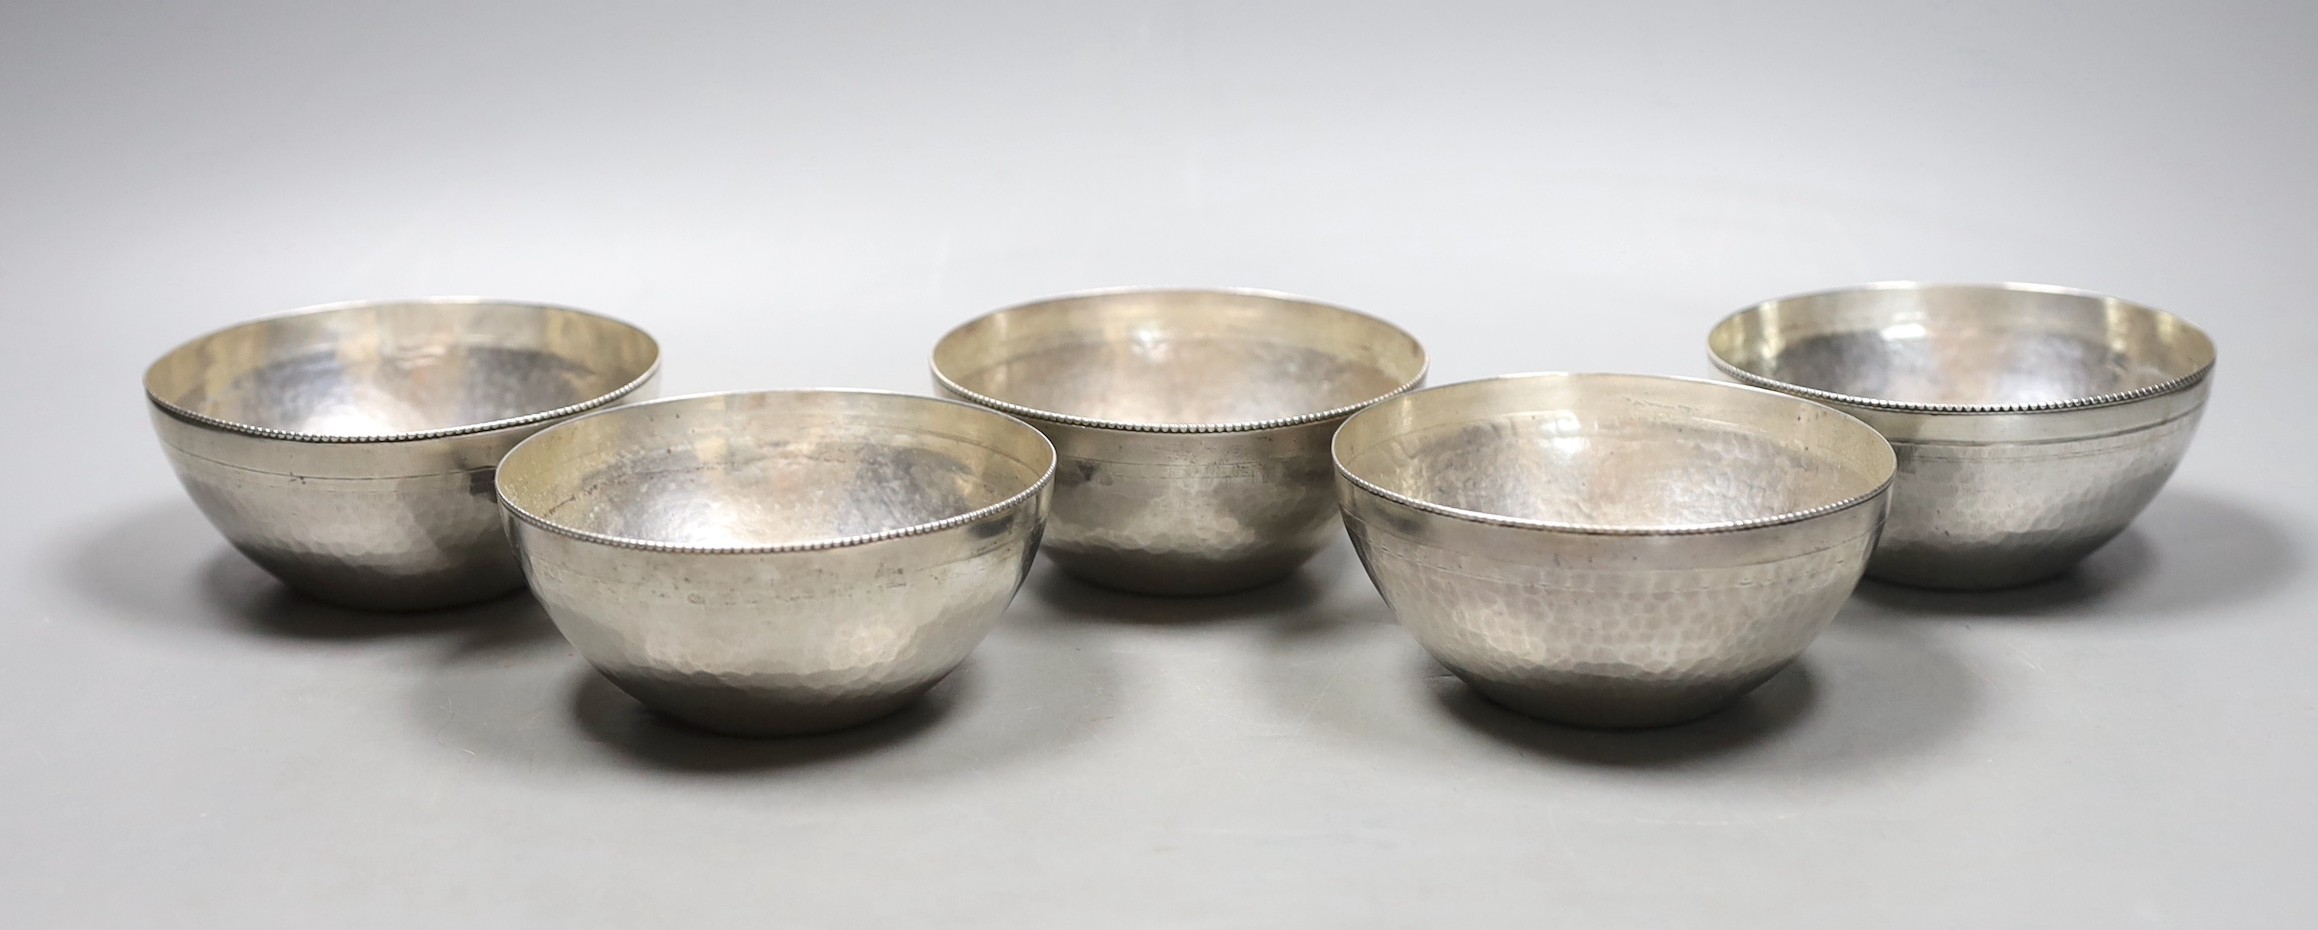 A set of five early to mid 20th century Egyptian planished white metal finger bowls, diameter 10.5cm, 22.5oz.